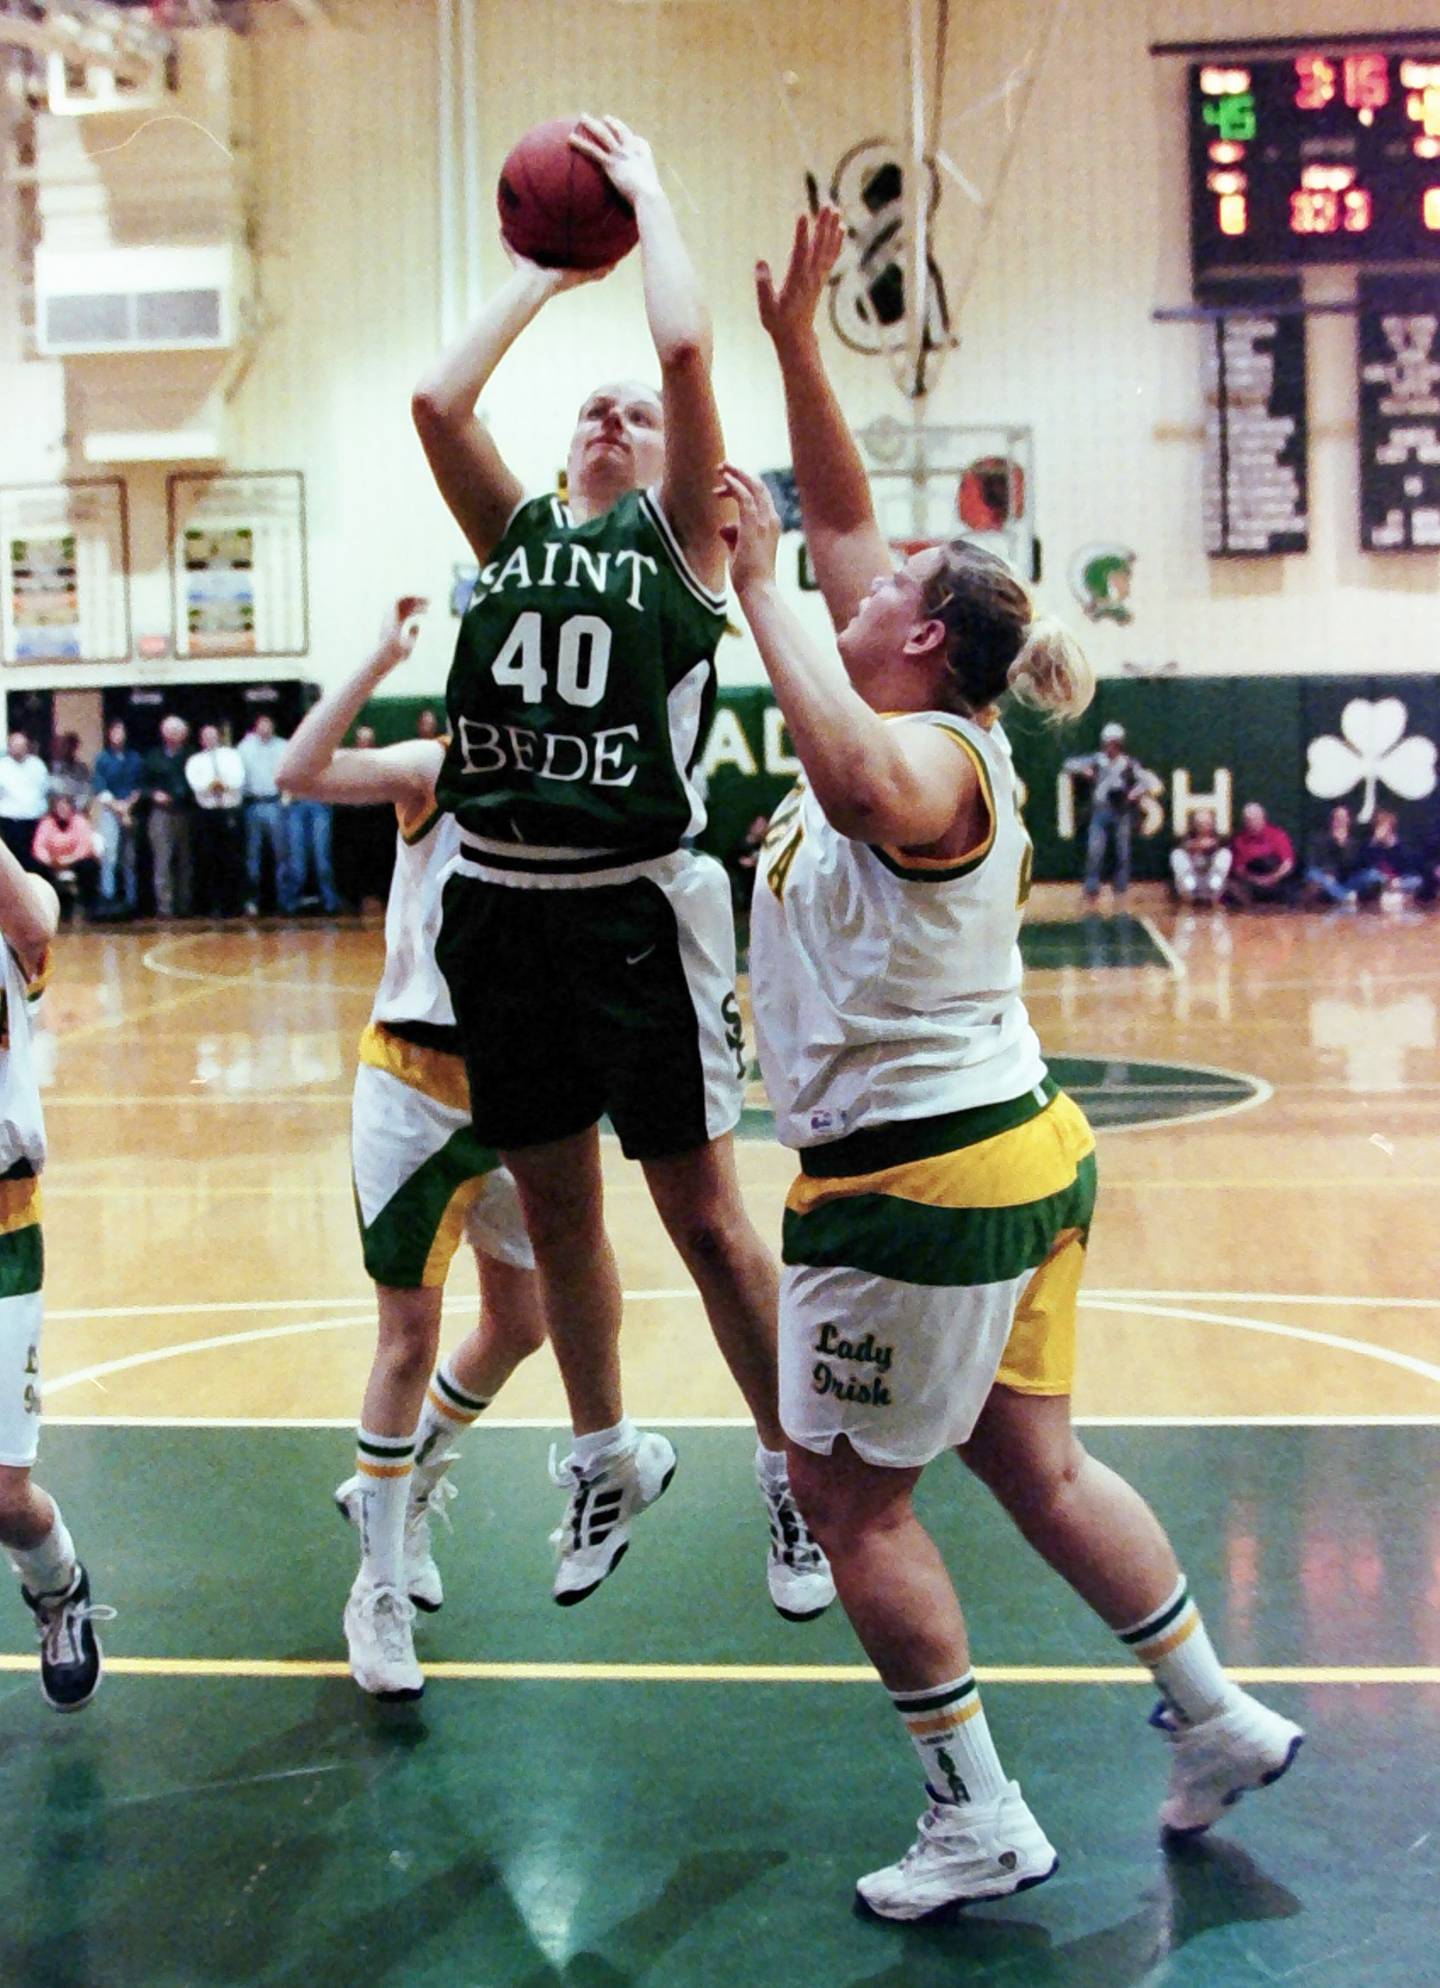 St. Bede's Erin McGunnigal shoots a jump shot over a Seneca player during the Supersectional game on Feb. 21, 2000.